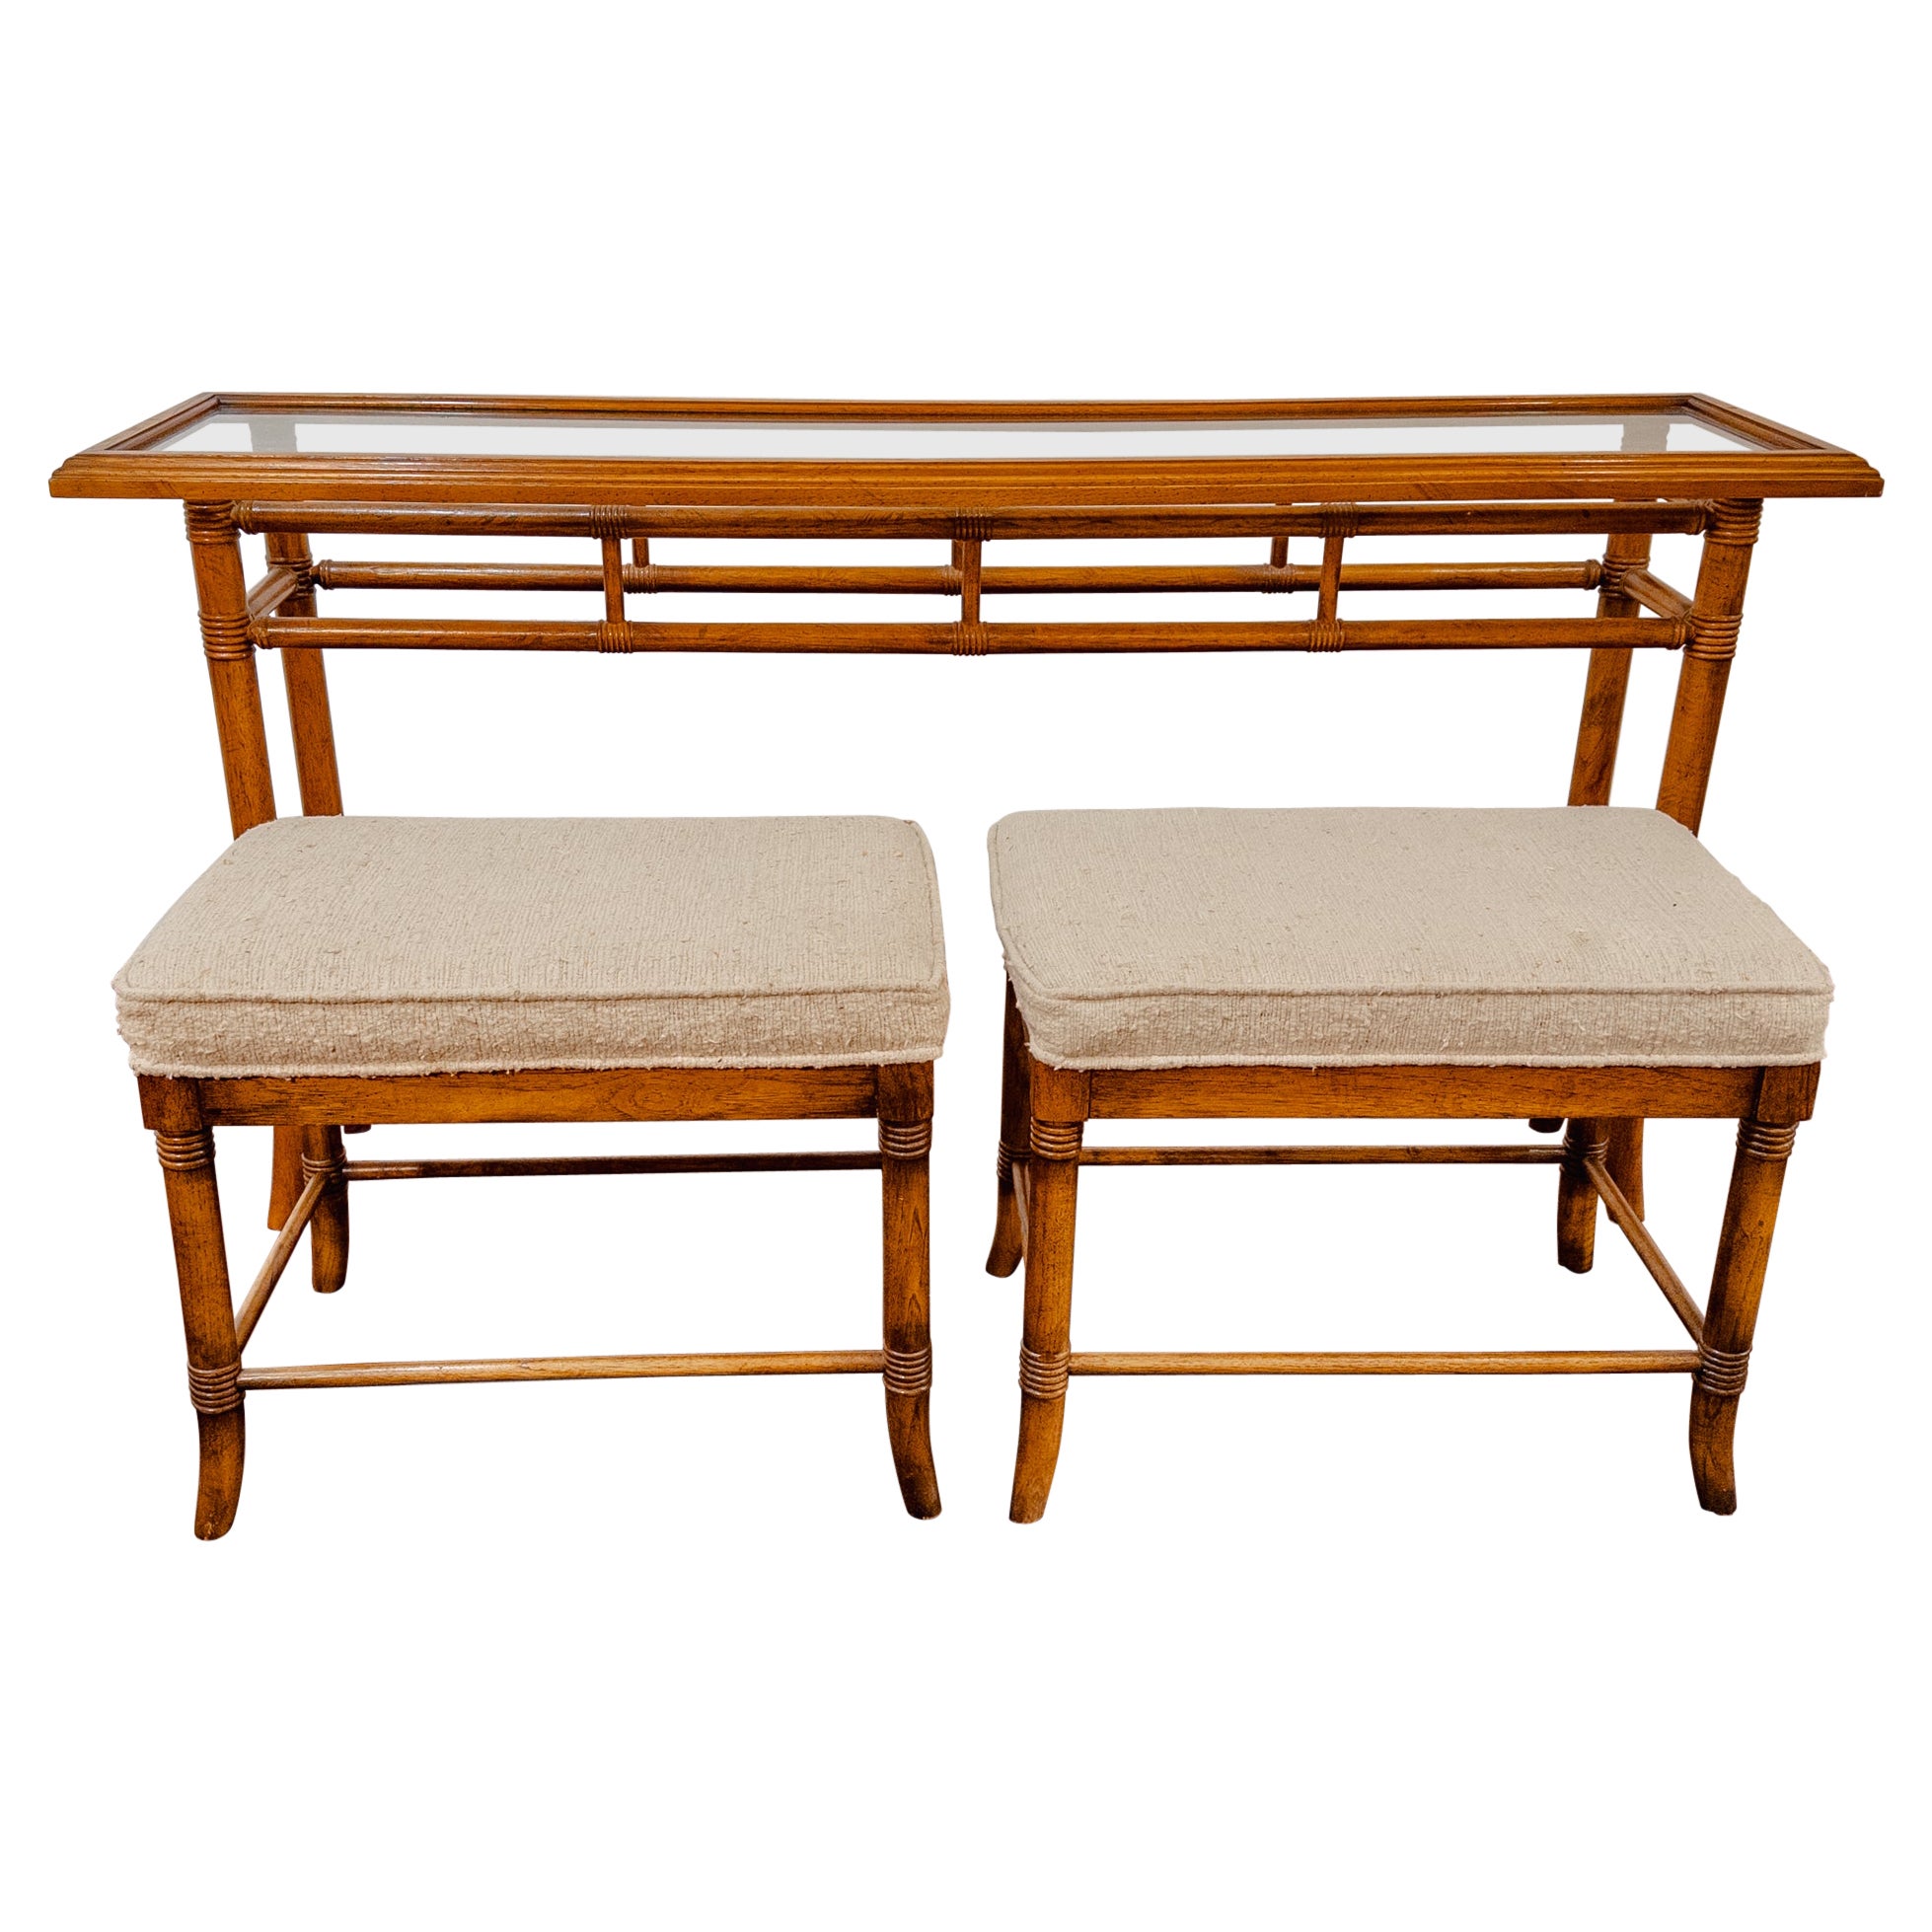 1970's Drexel Faux Bamboo Console Table with Matching Ottomans